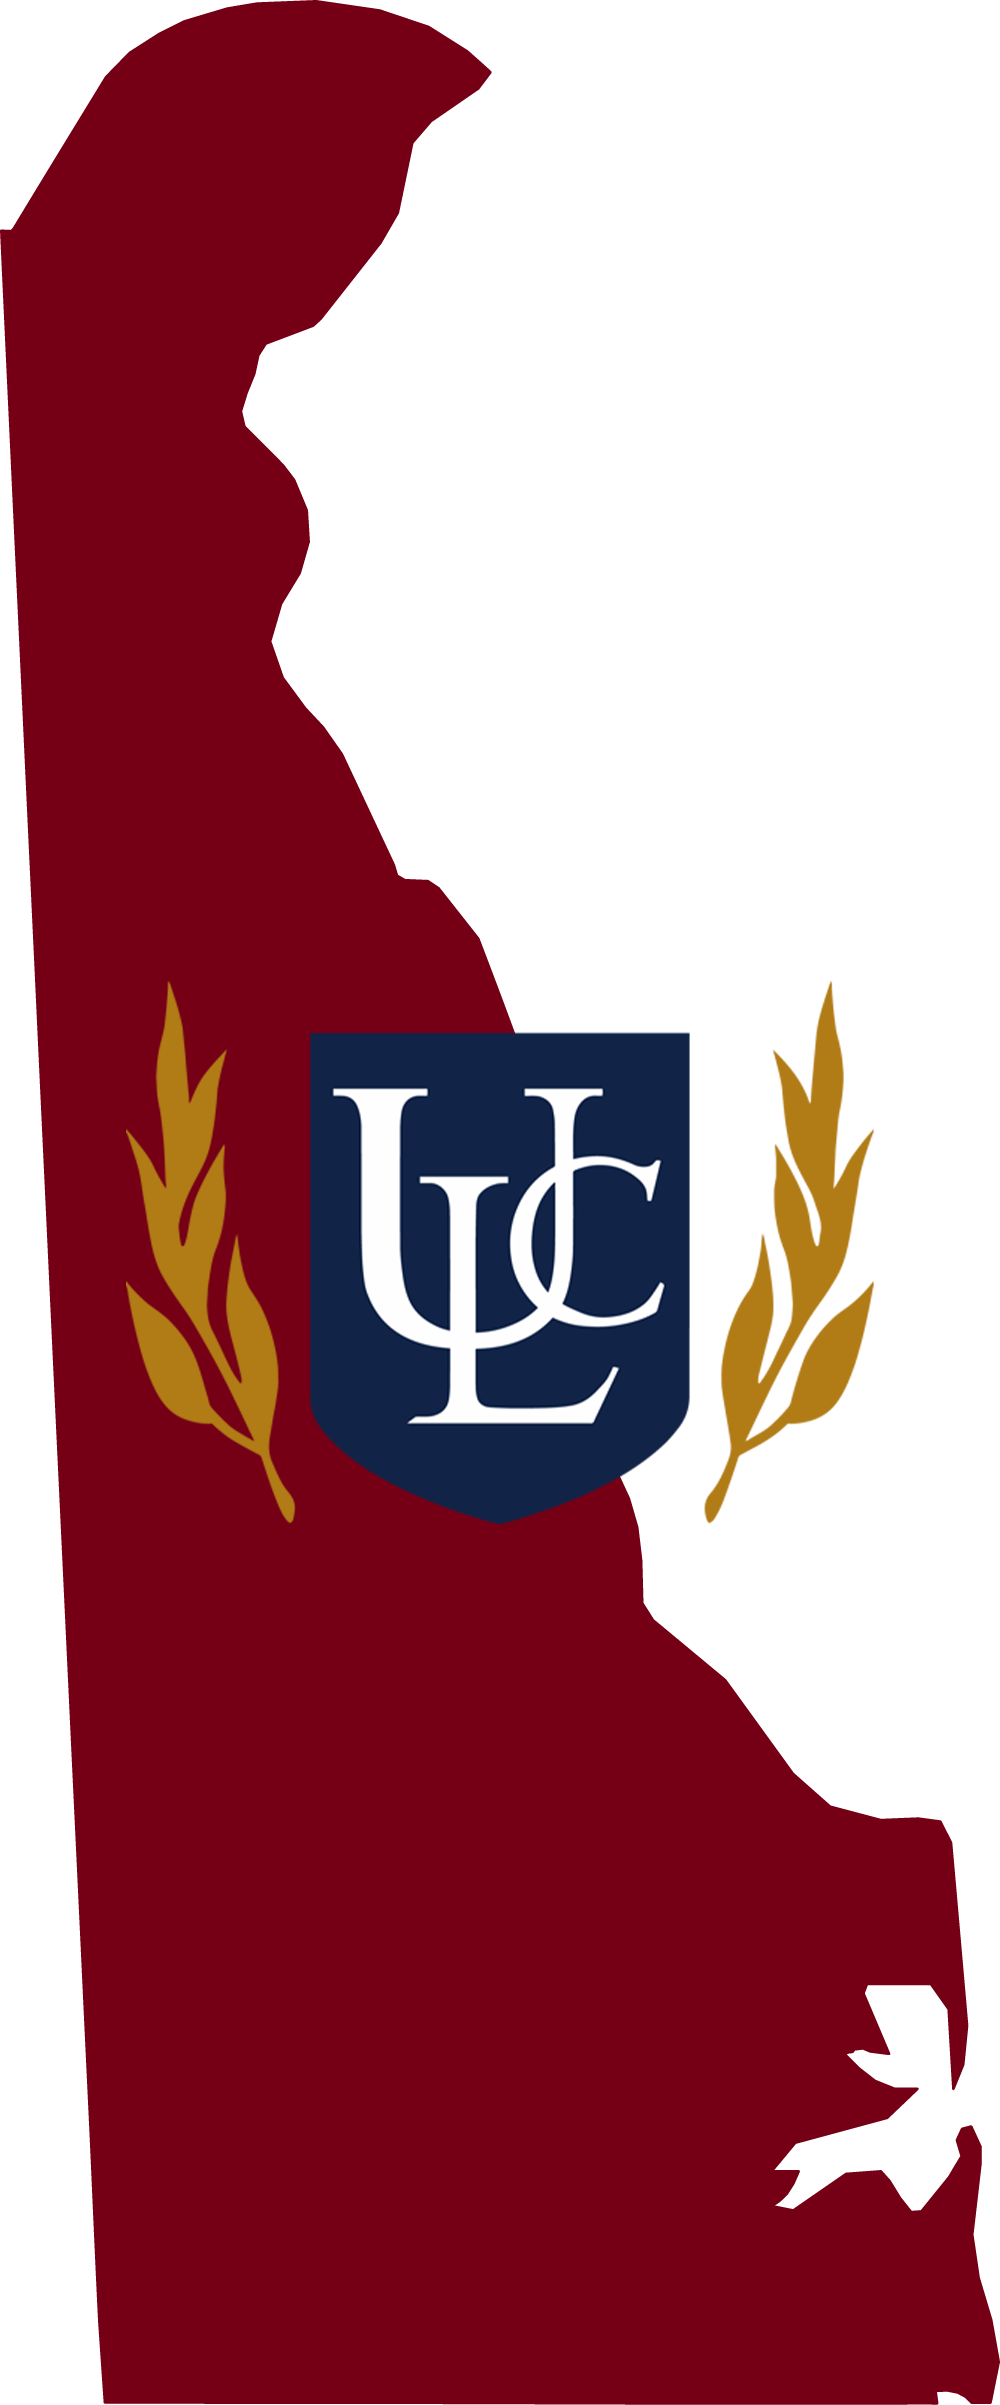 An outline of Delaware with the ULC logo